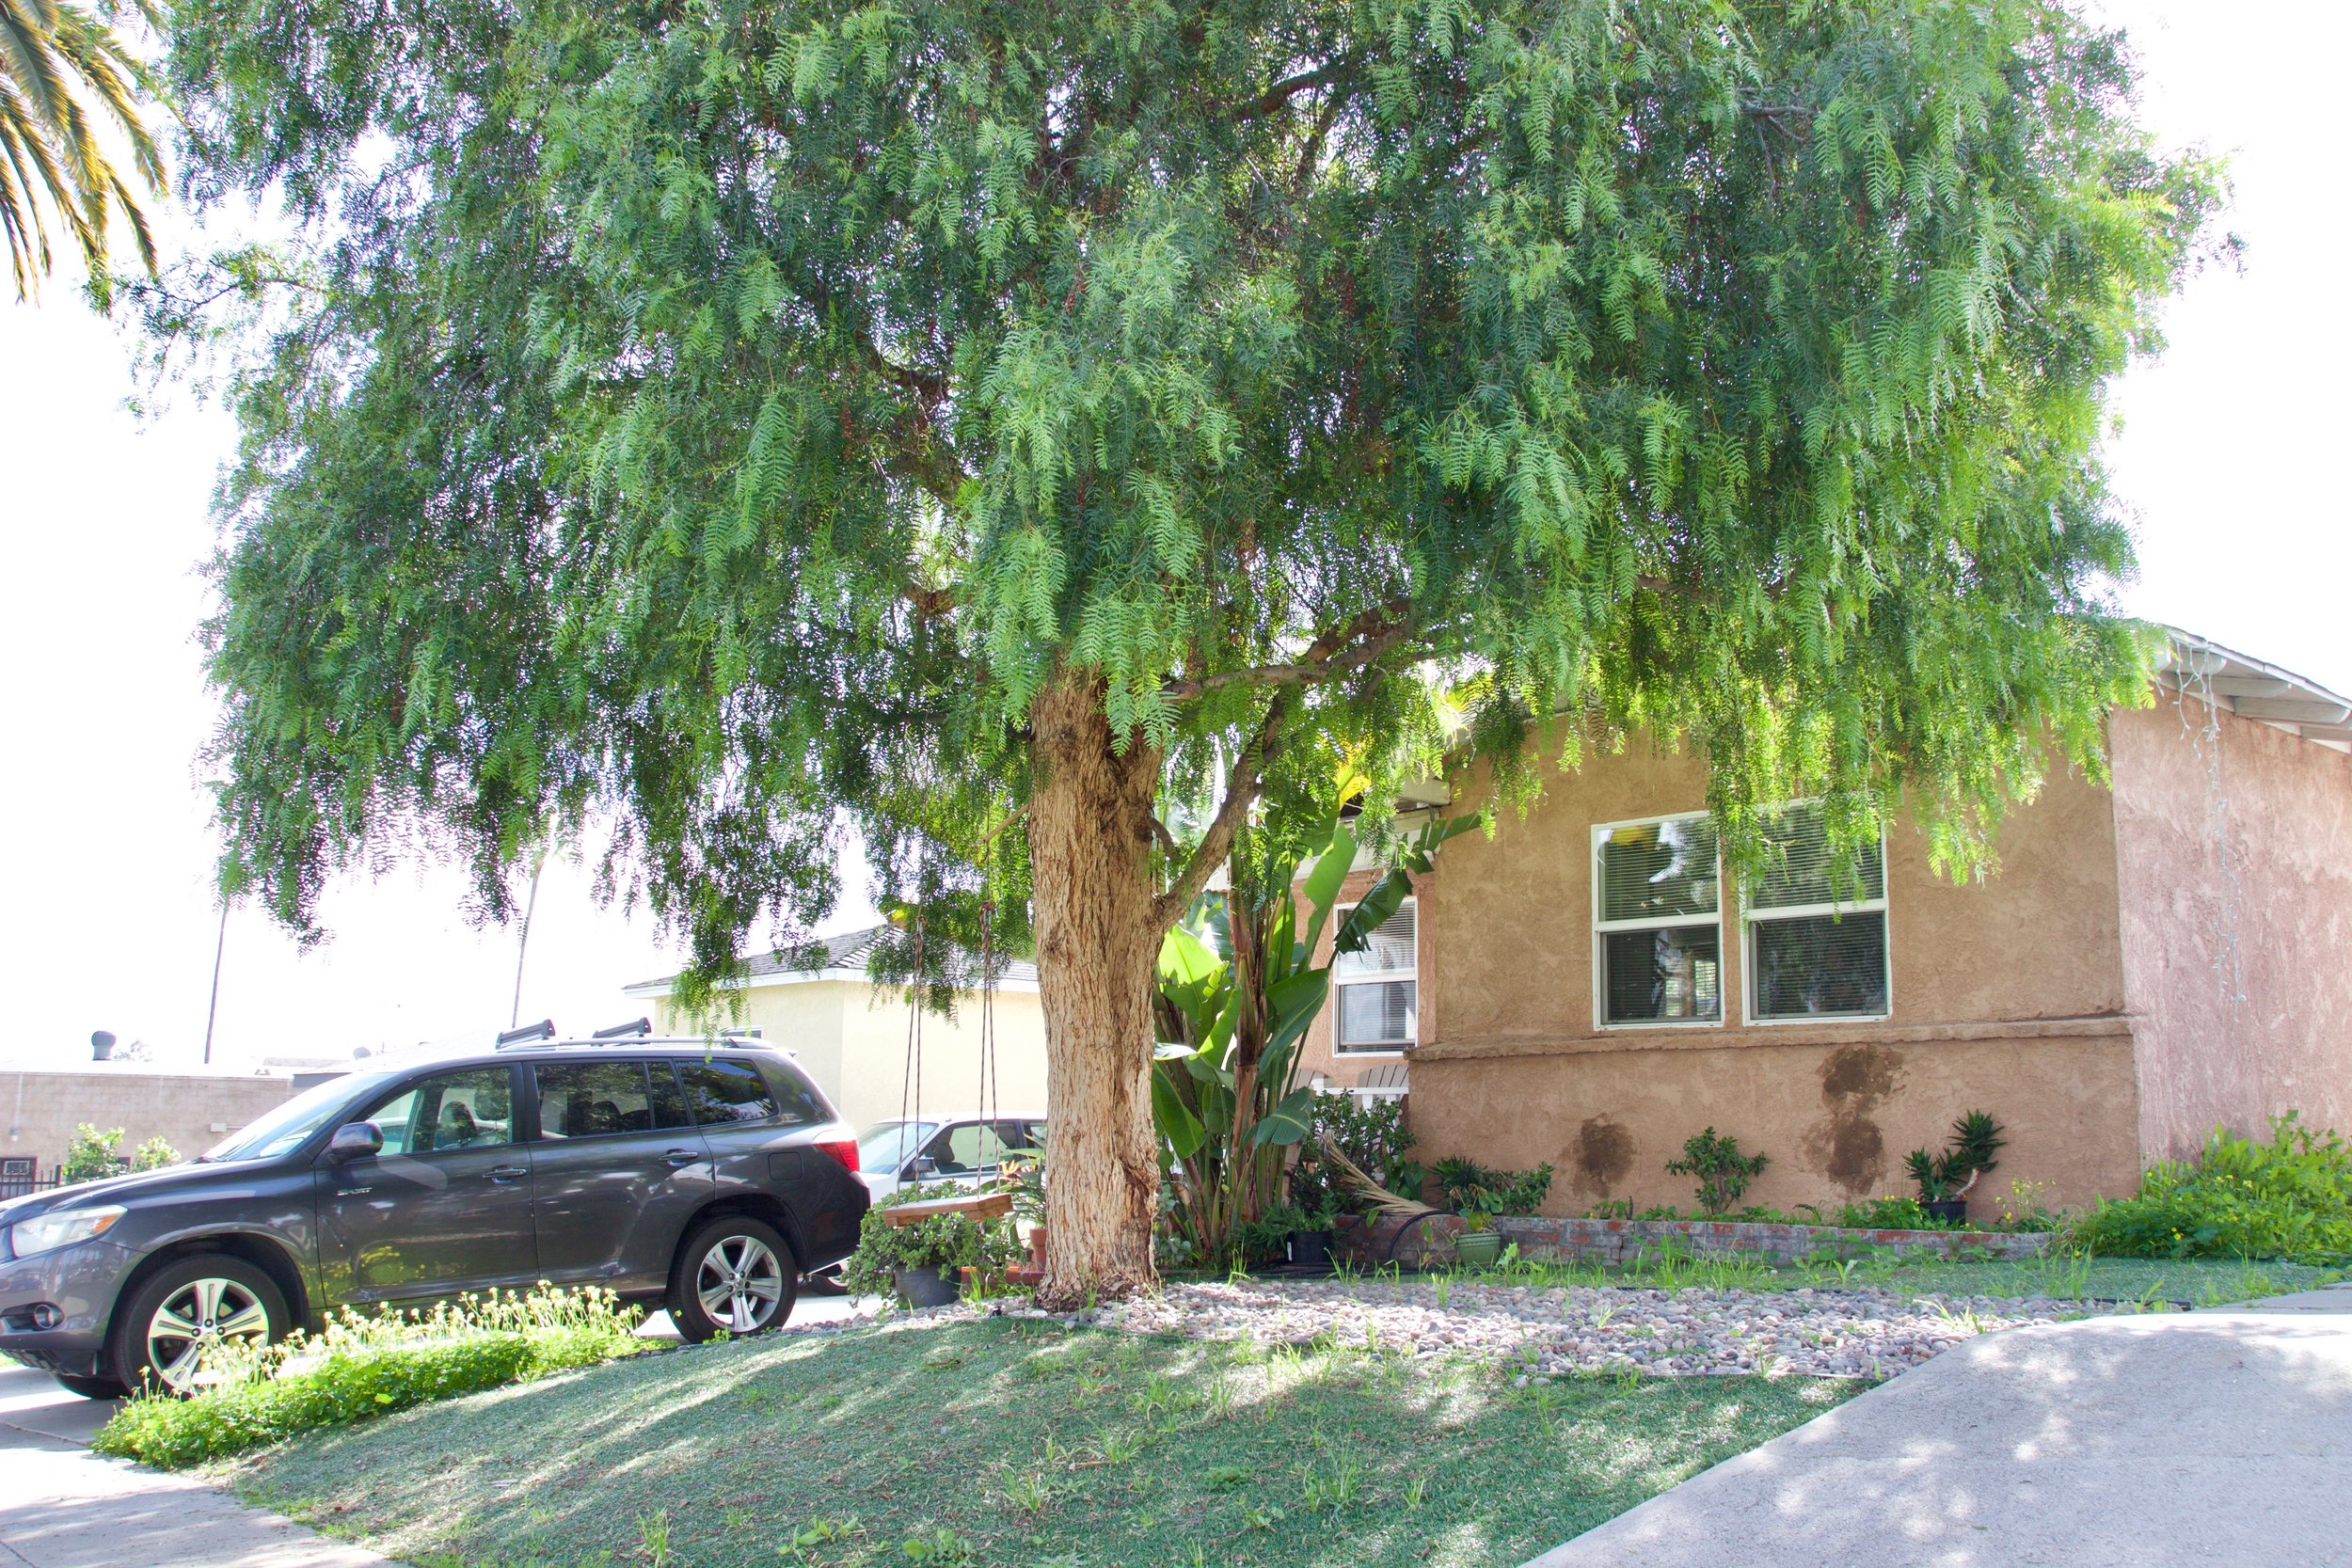 Green tree in front of a beige house with parked SUV.